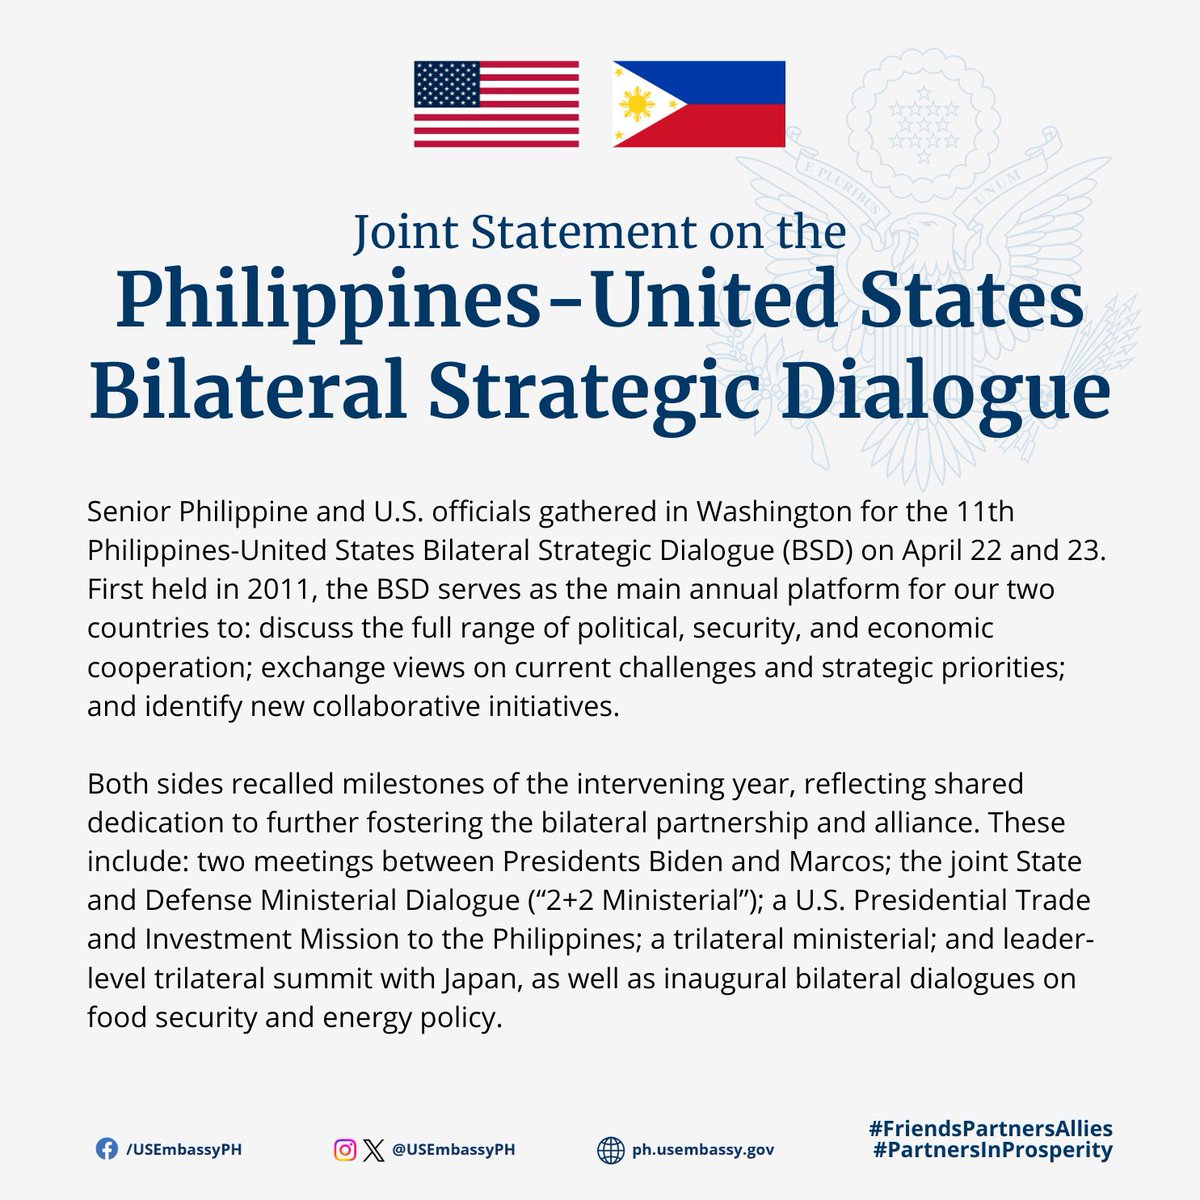 🇺🇸🤝🇵🇭 Read the full joint statement following the 11th Philippines-United States Bilateral Strategic Dialogue: state.gov/joint-statemen… #FriendsPartnersAllies #PartnersInProsperity